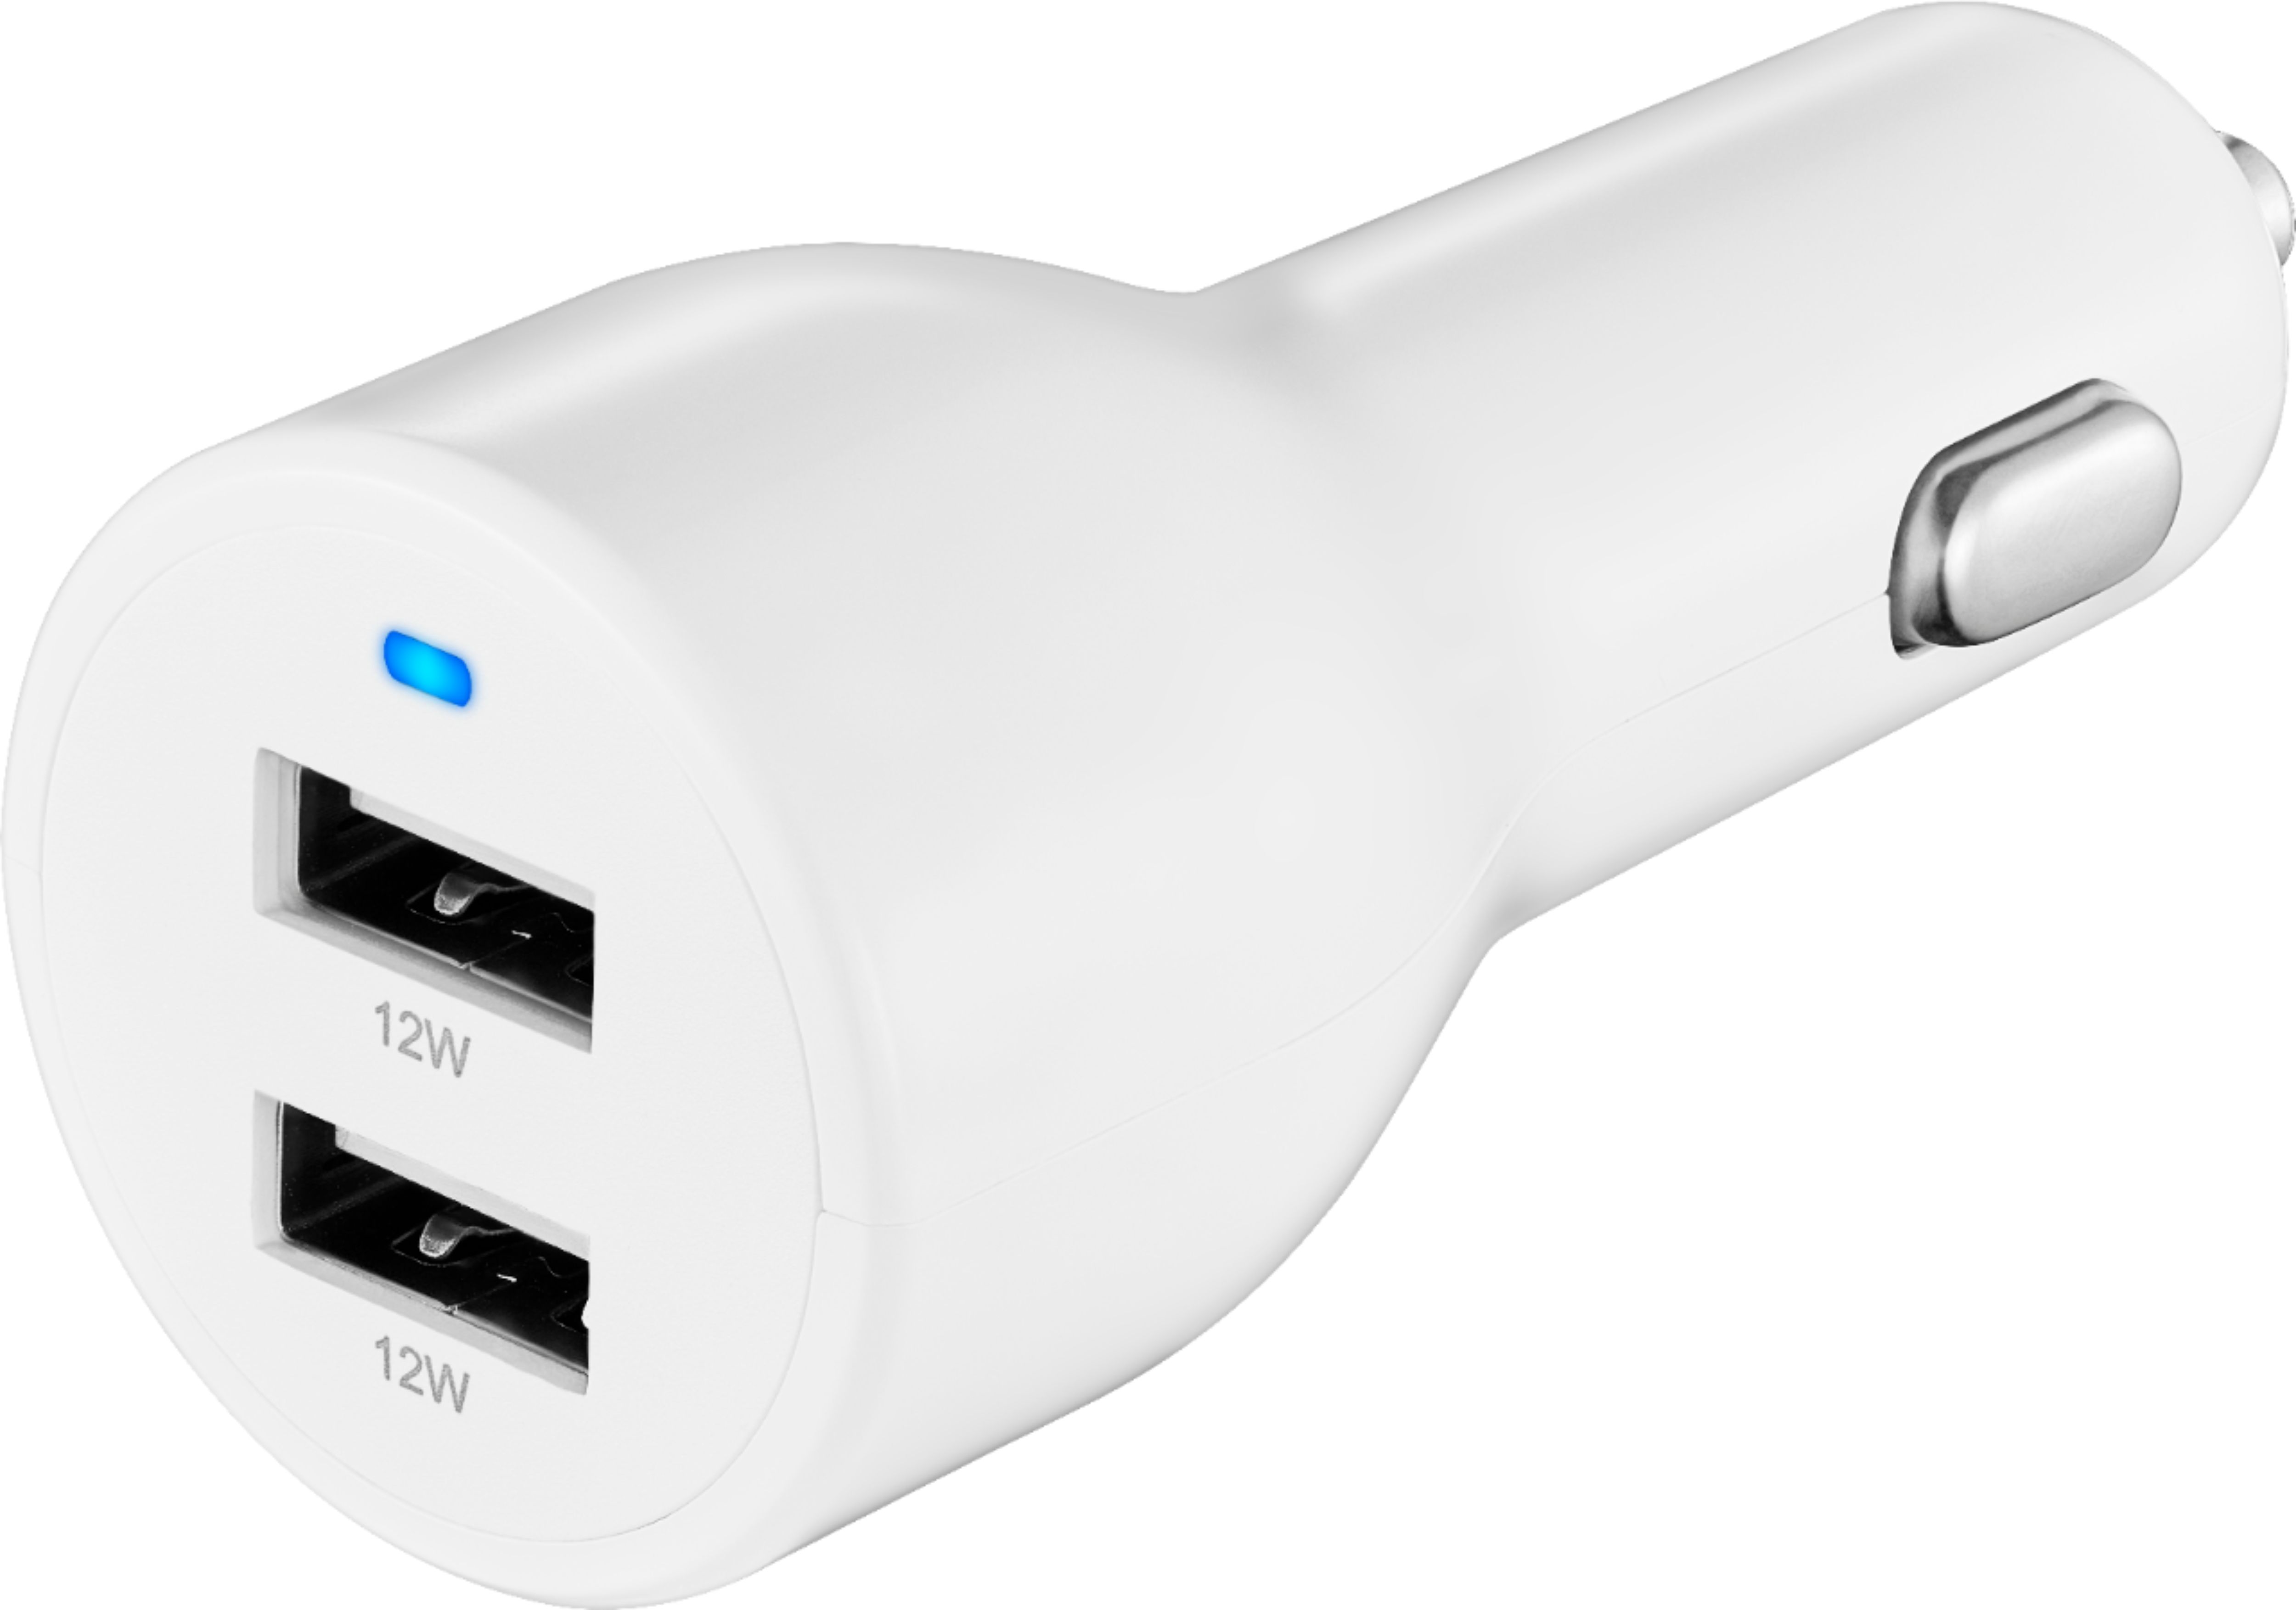 24W Insignia Vehicle Charger w/ 2 USB Ports (White) $7 + Free Curbside Pickup at Best Buy